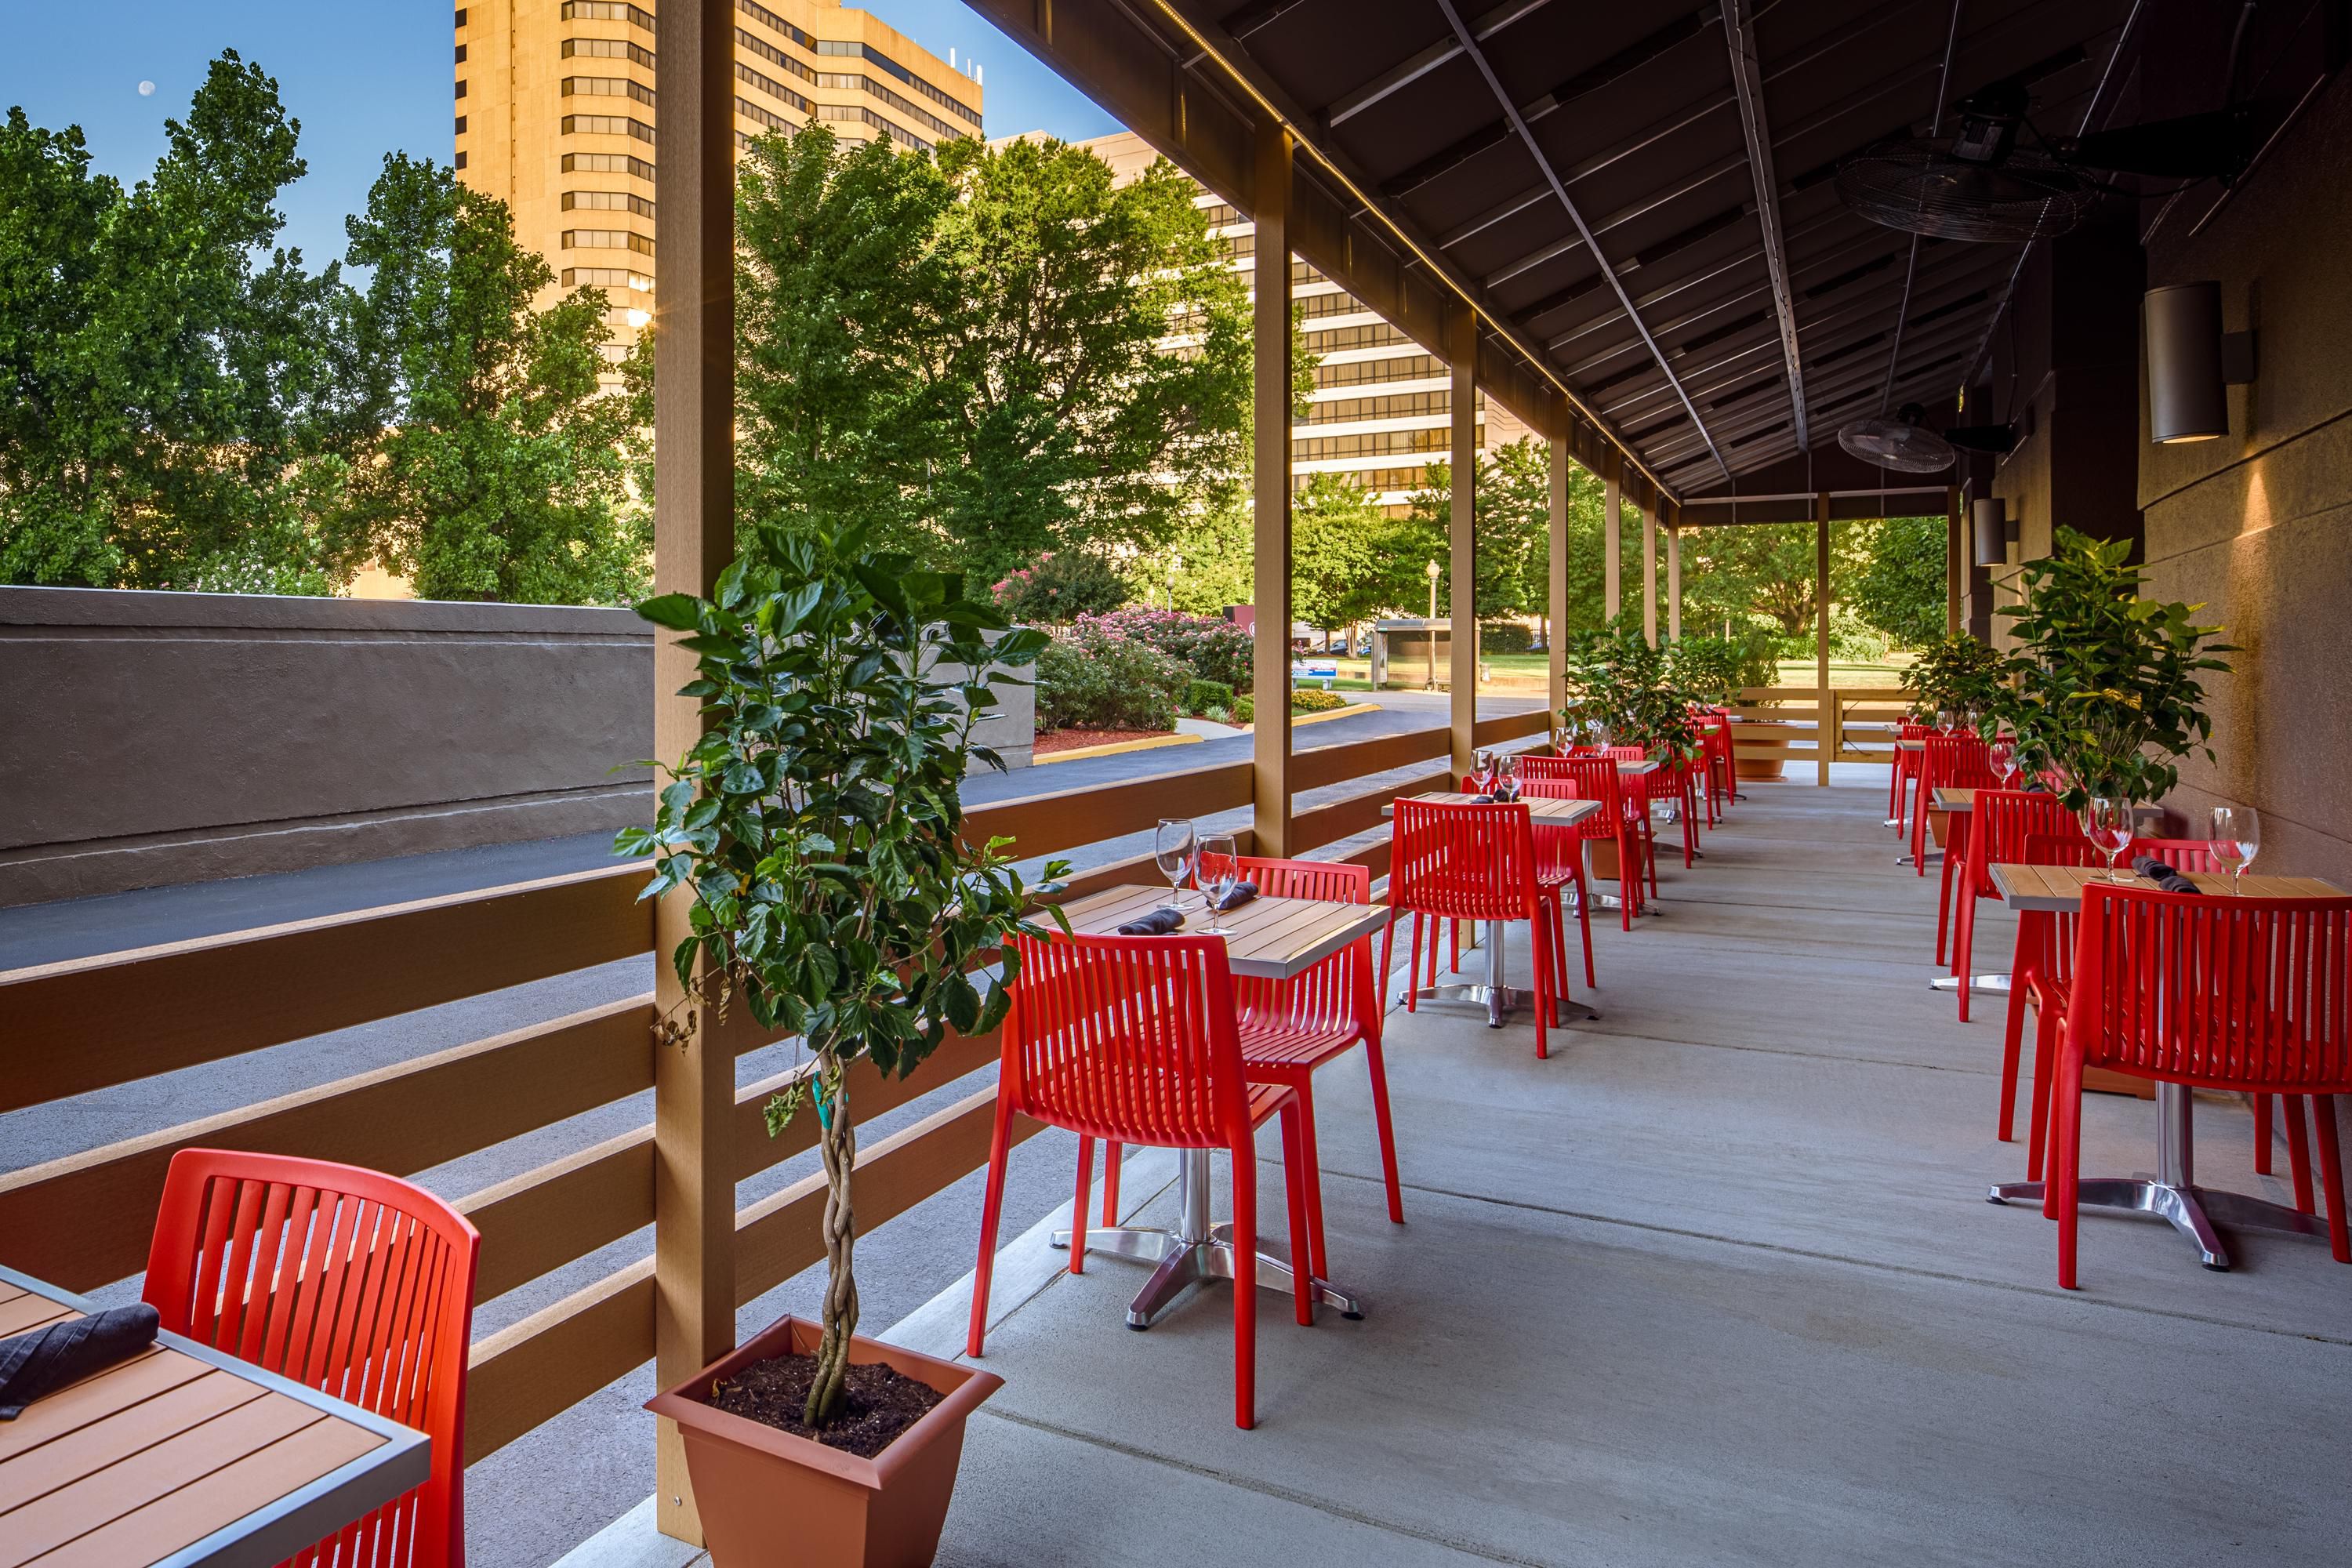 Overlook downtown views and enjoy dinner on our outdoor patio